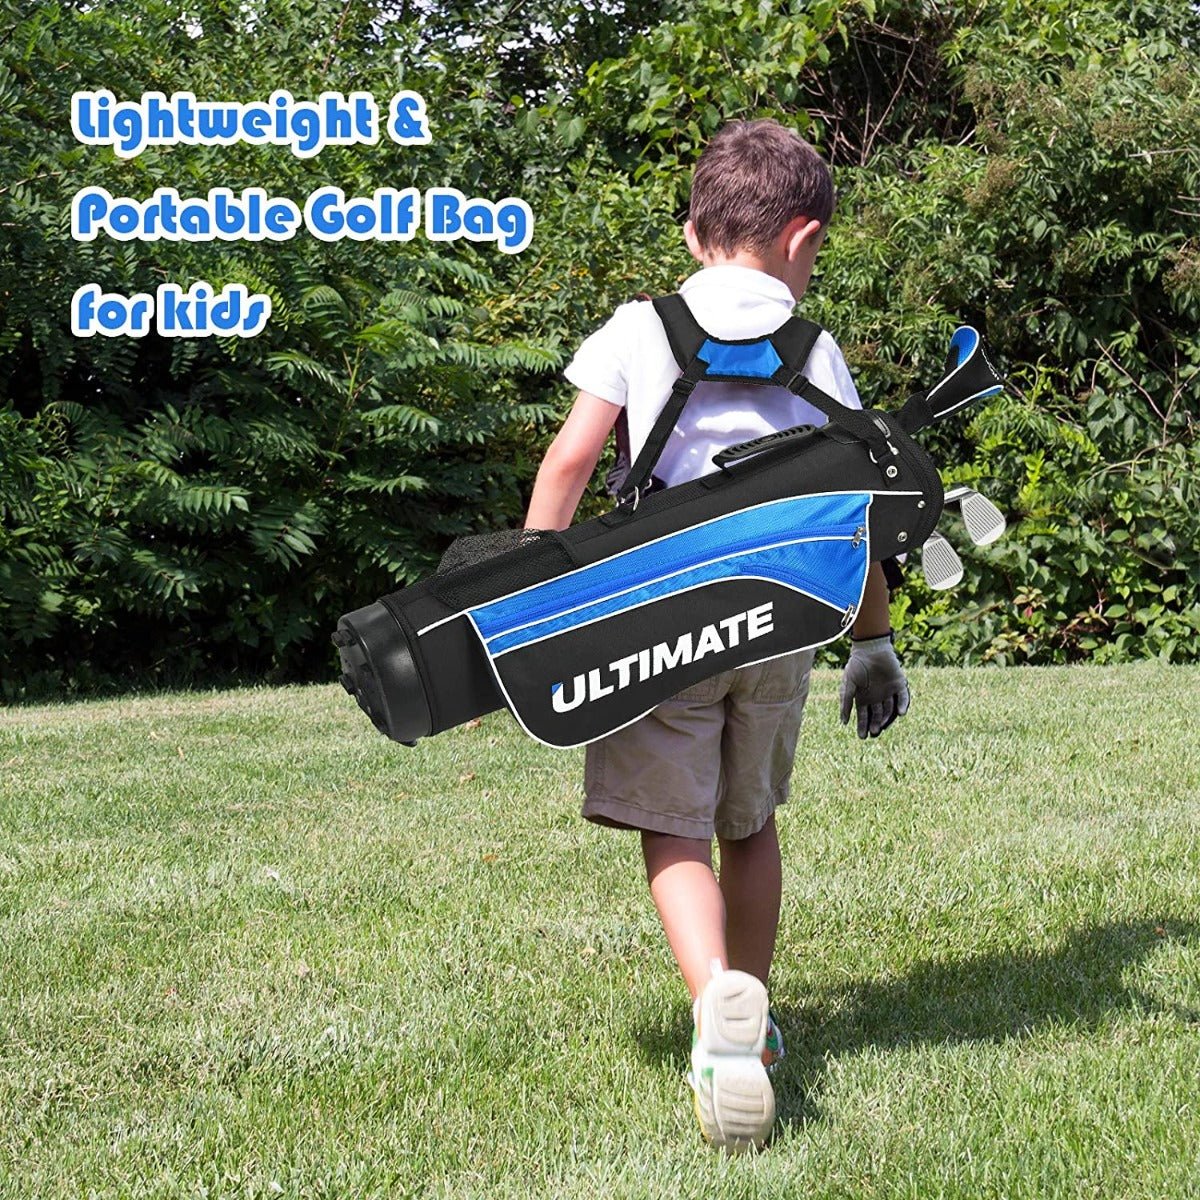 Kids Golf Club Set: Fairway Wood, Irons, Putter, Stand Bag Included